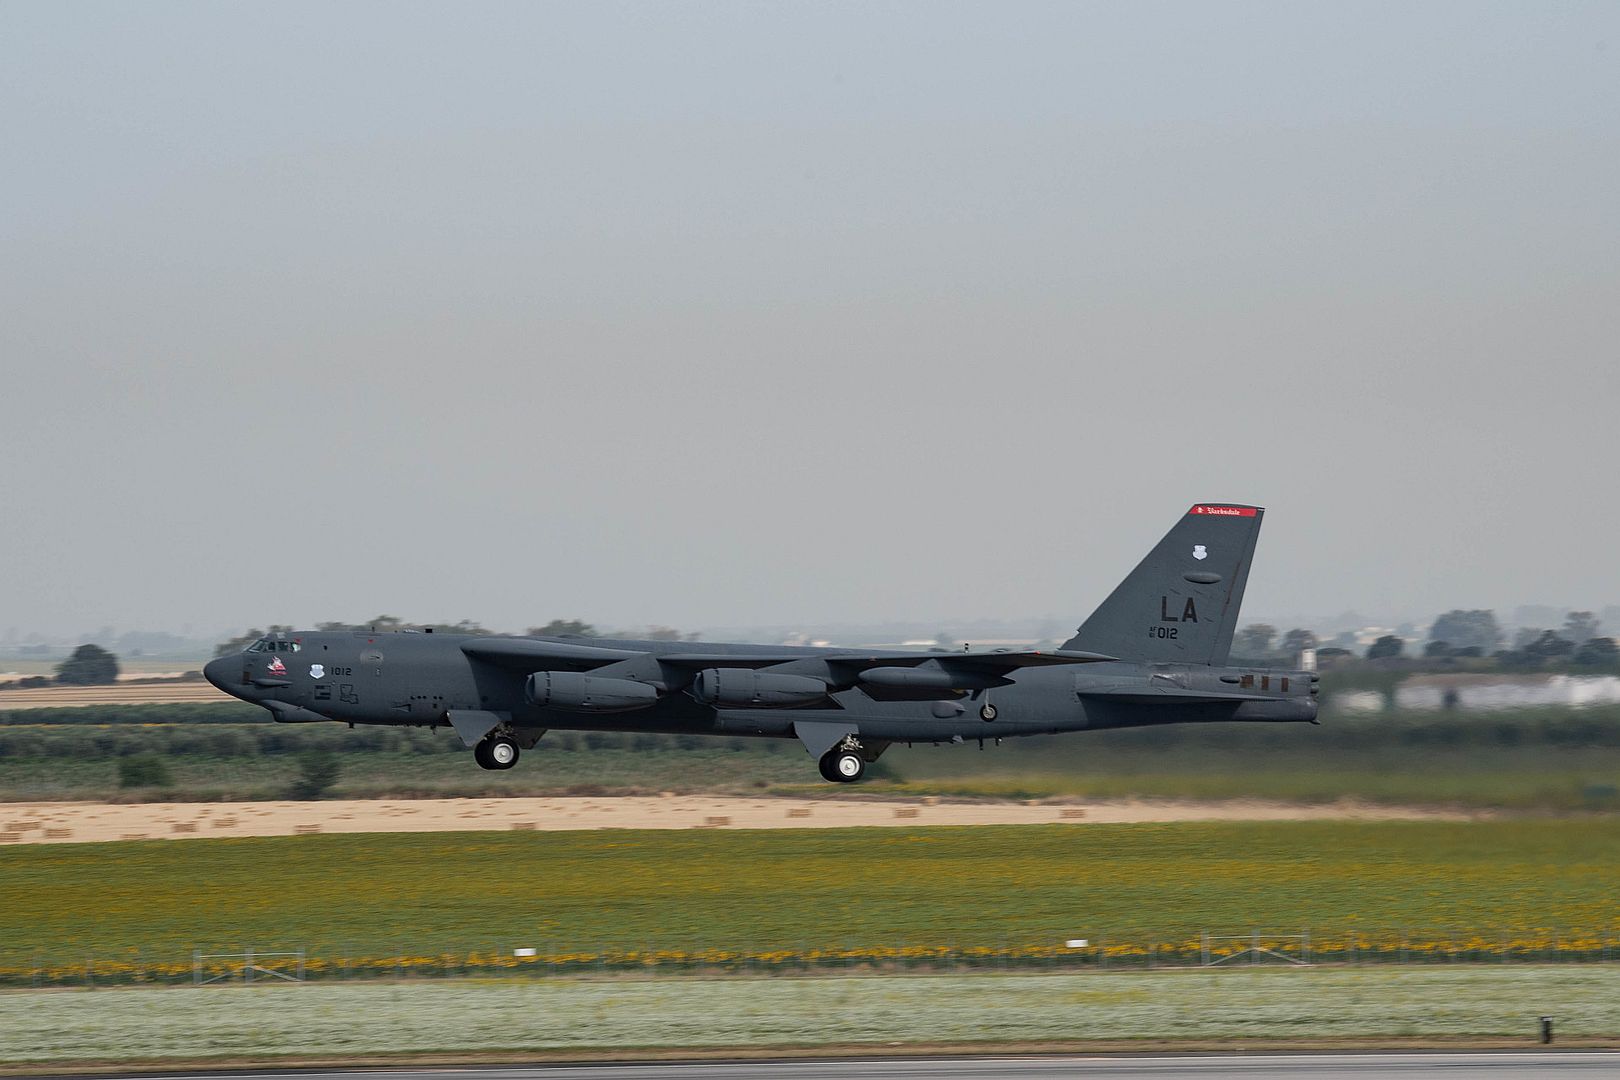 52H Stratofortress Assigned To The 2nd Bomb Wing Barksdale Air Force Base Louisiana Takes Off At Mor N Air Base Spain May 31 2021